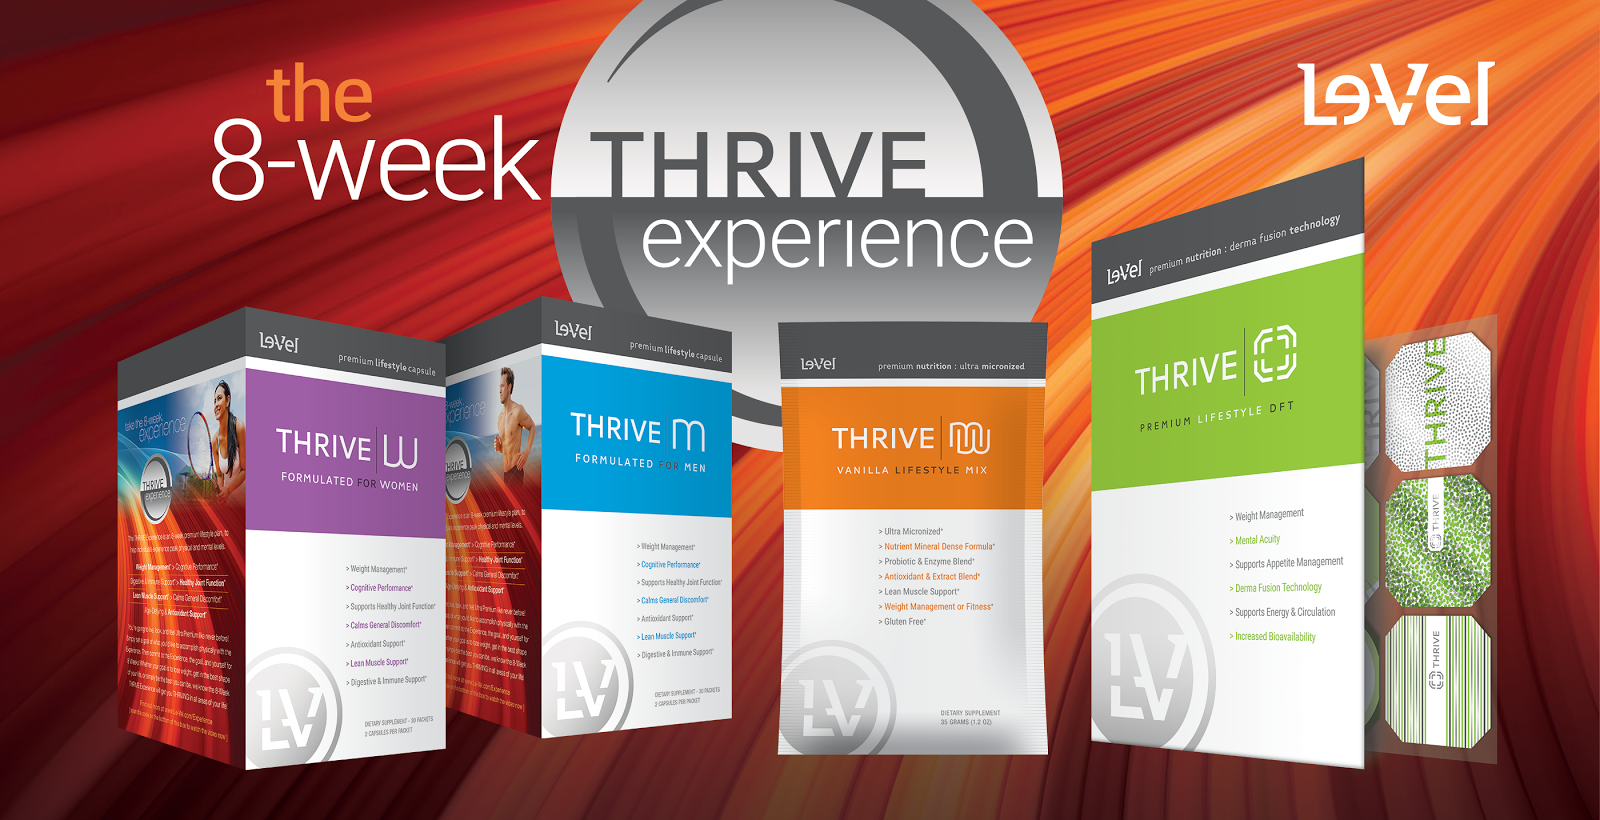 The 8 week THRIVE experience